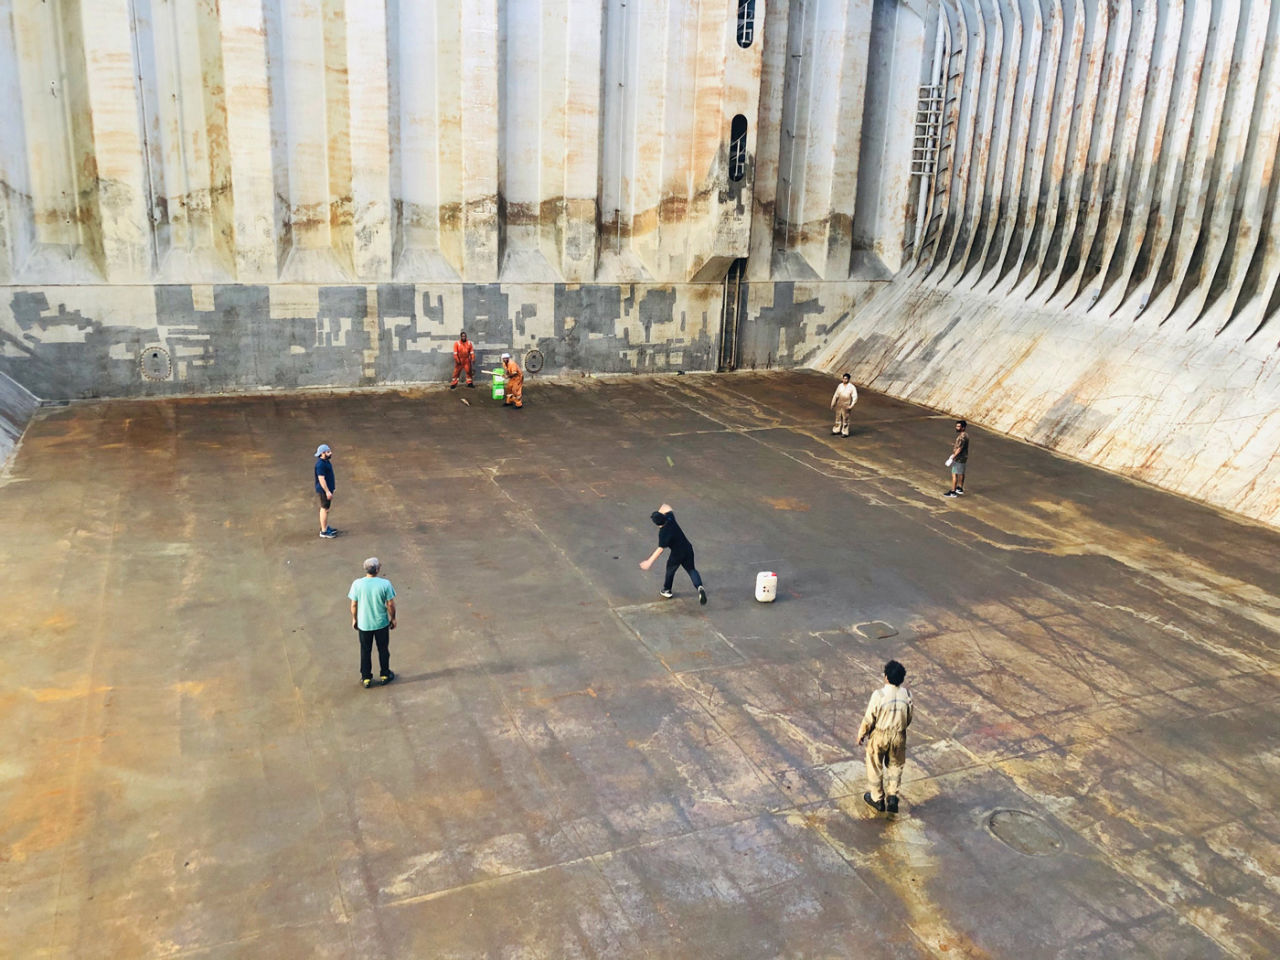 Sarker M Hasnat Lenin: Seafarers from five different countries play cricket in the cargo hold of a ship in the middle of the North Atlantic Ocean